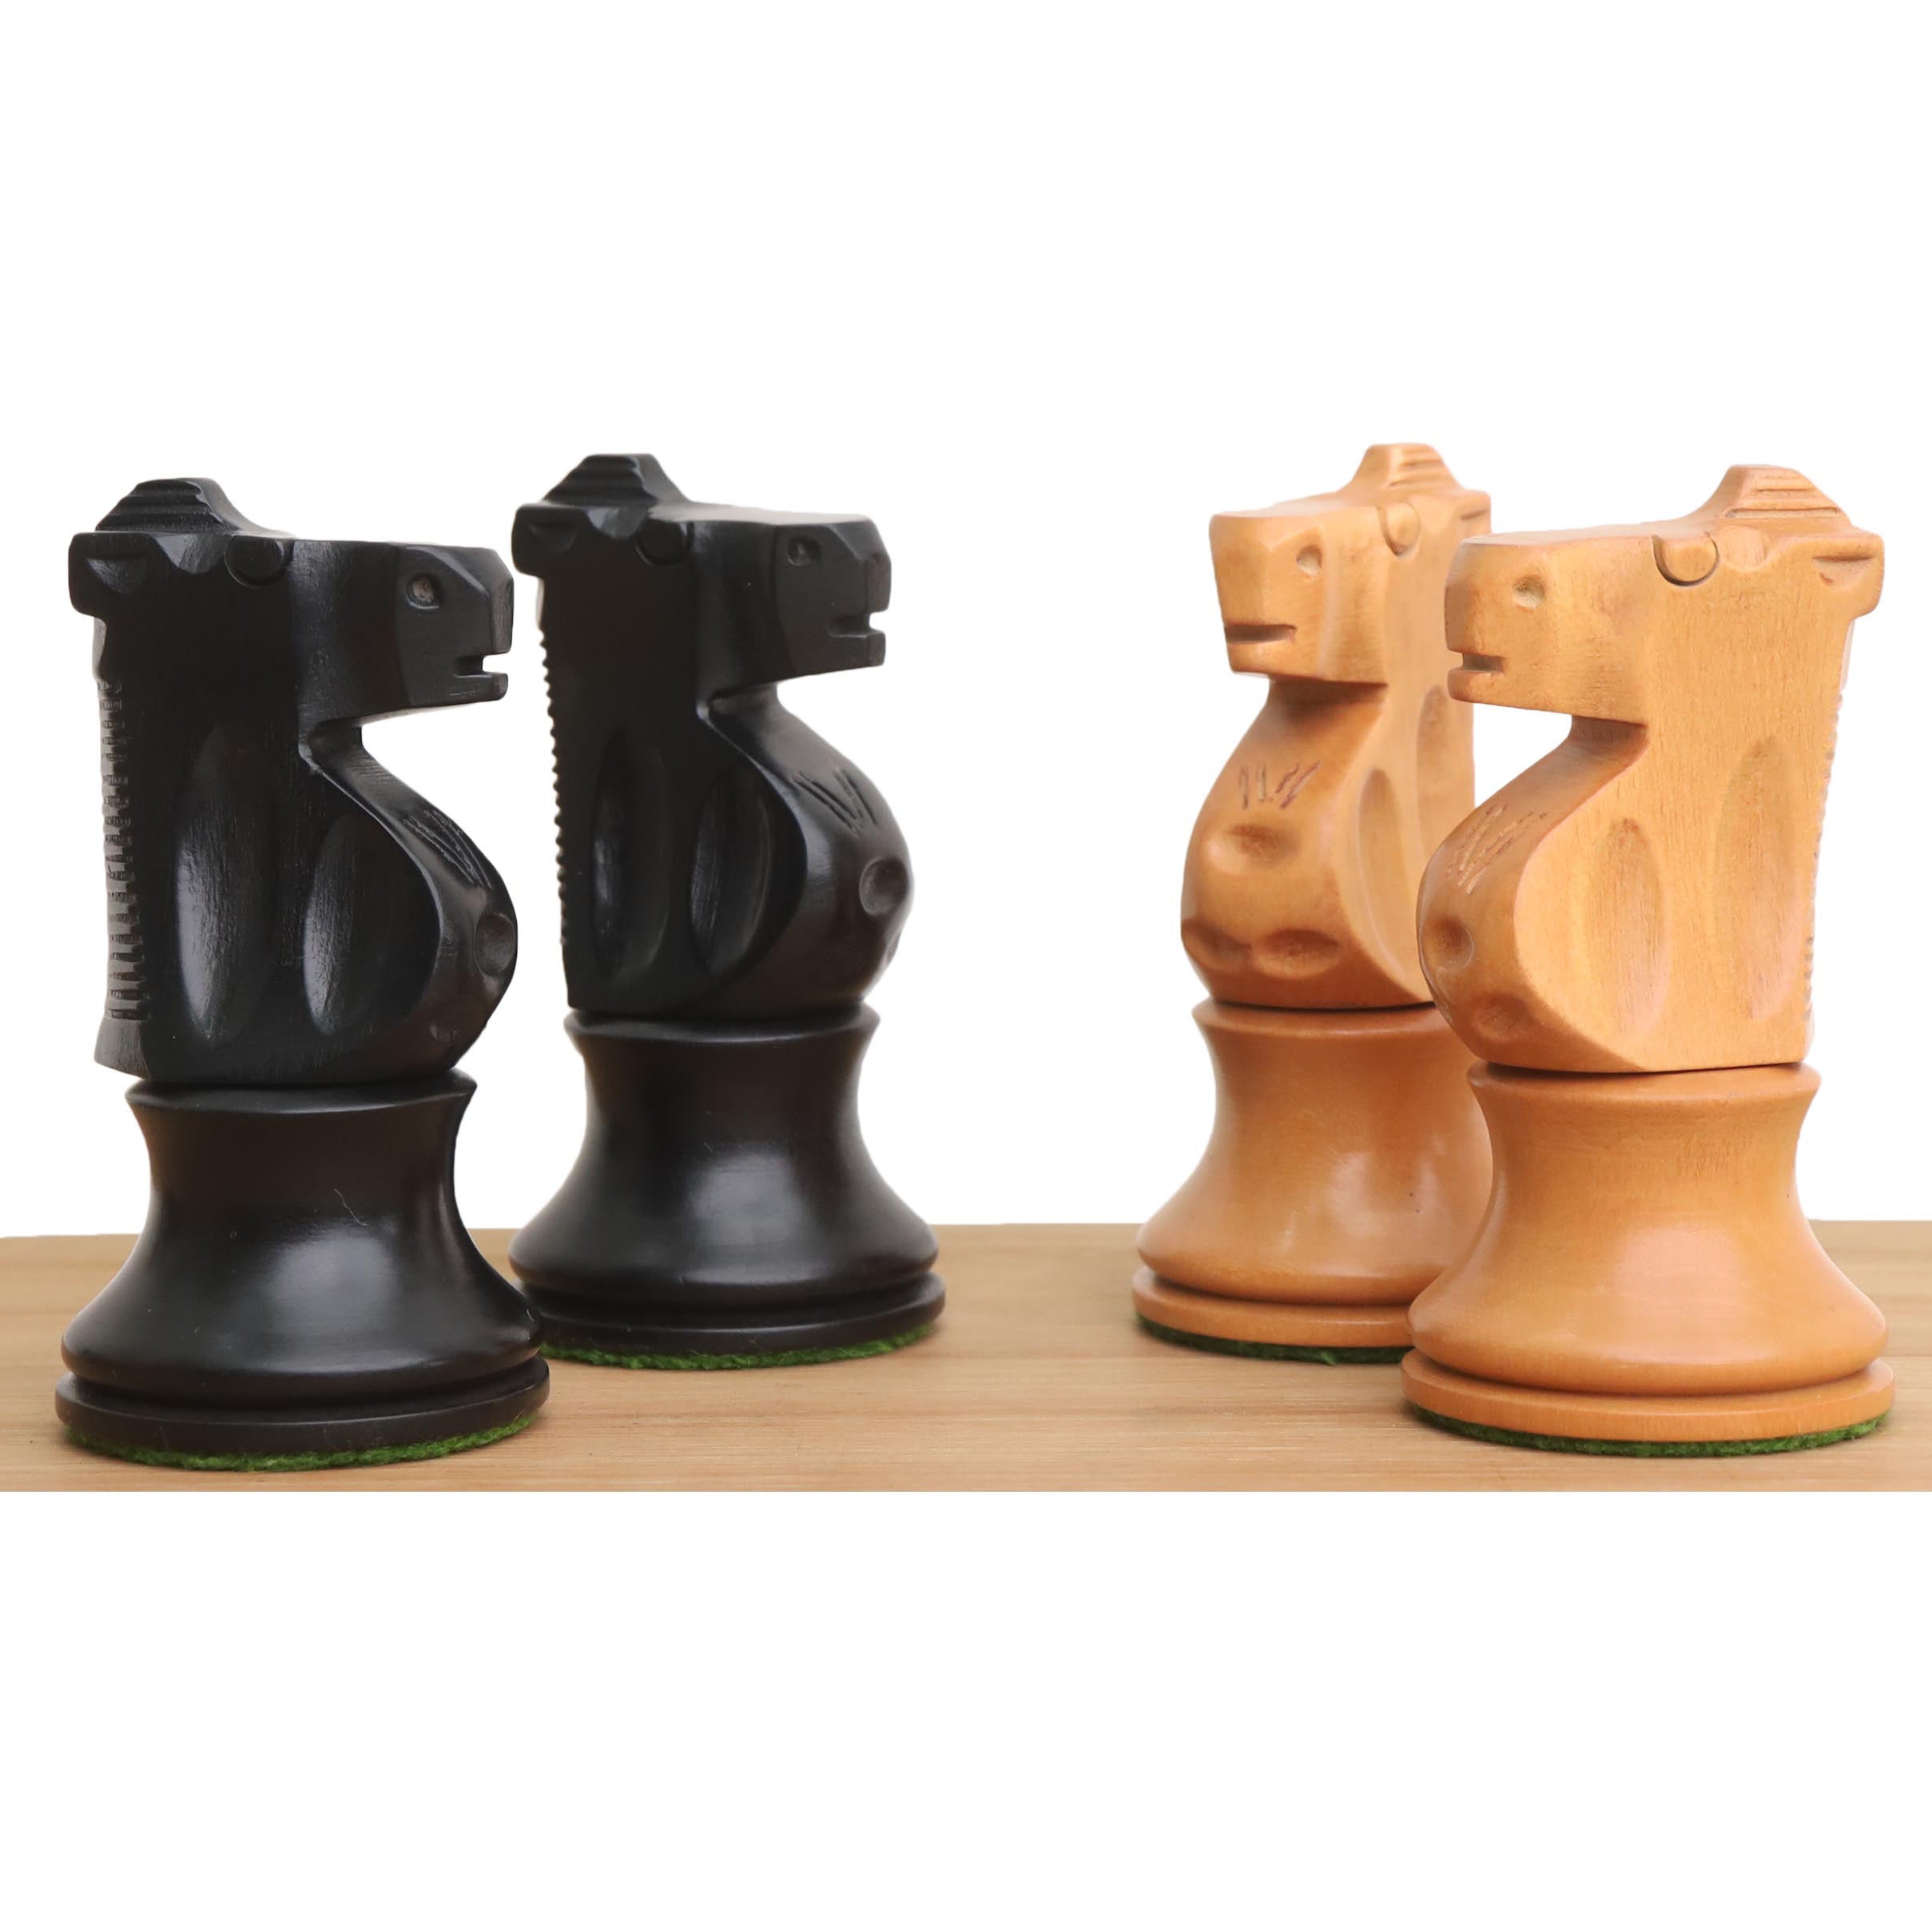 French Lardy Carry-All Chess Set Golden Rosewood & Boxwood Pieces - Black